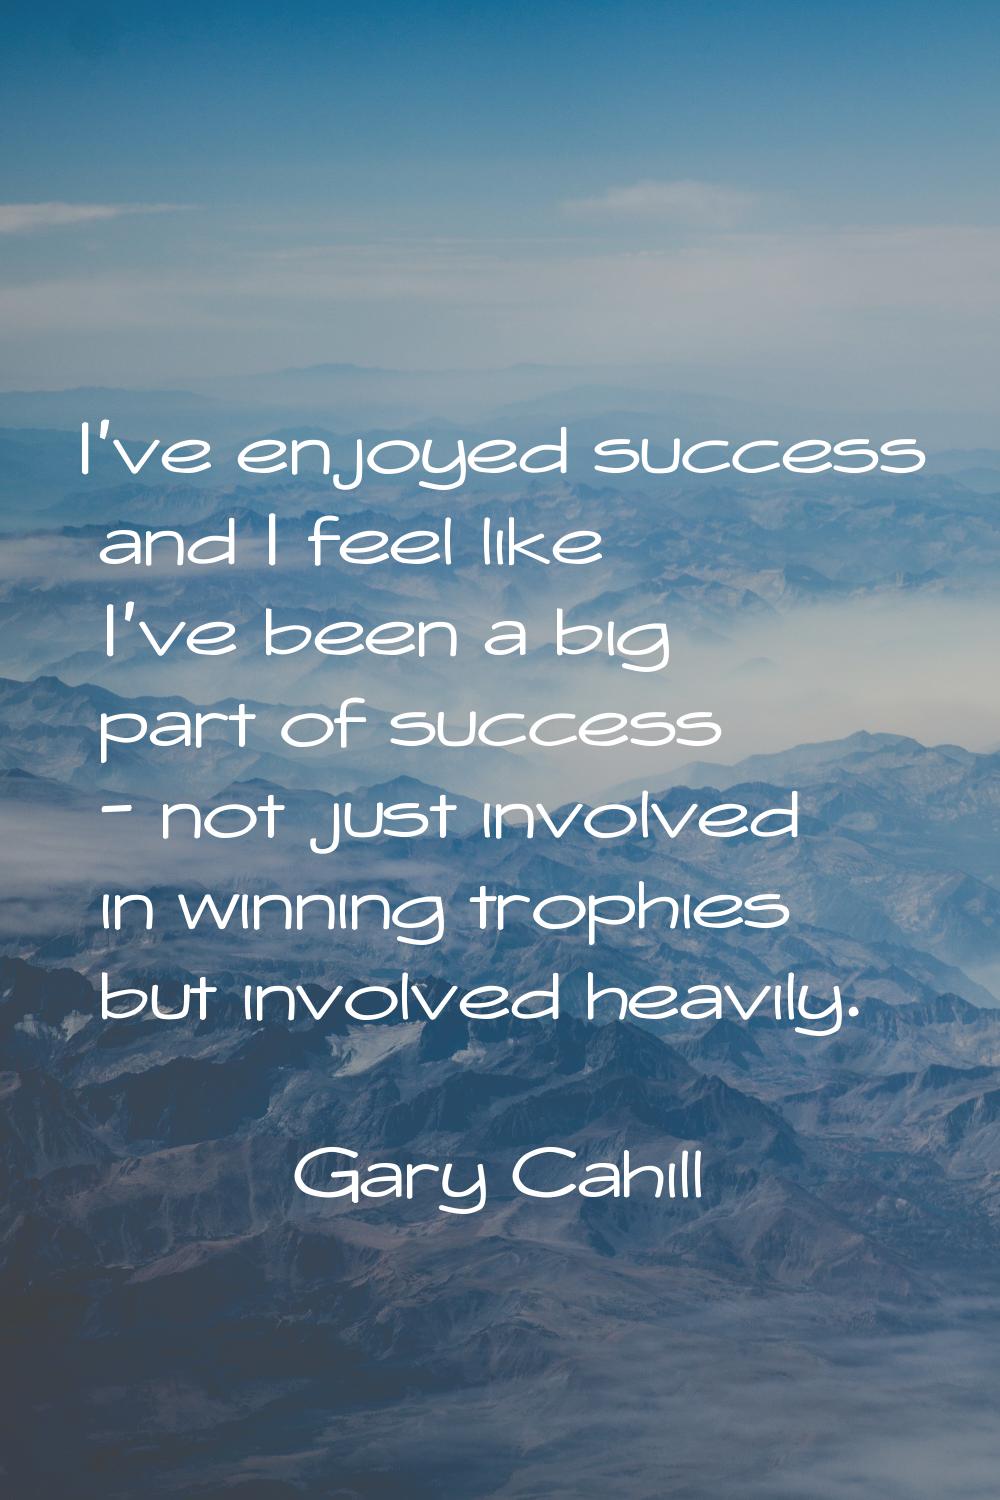 I've enjoyed success and I feel like I've been a big part of success - not just involved in winning